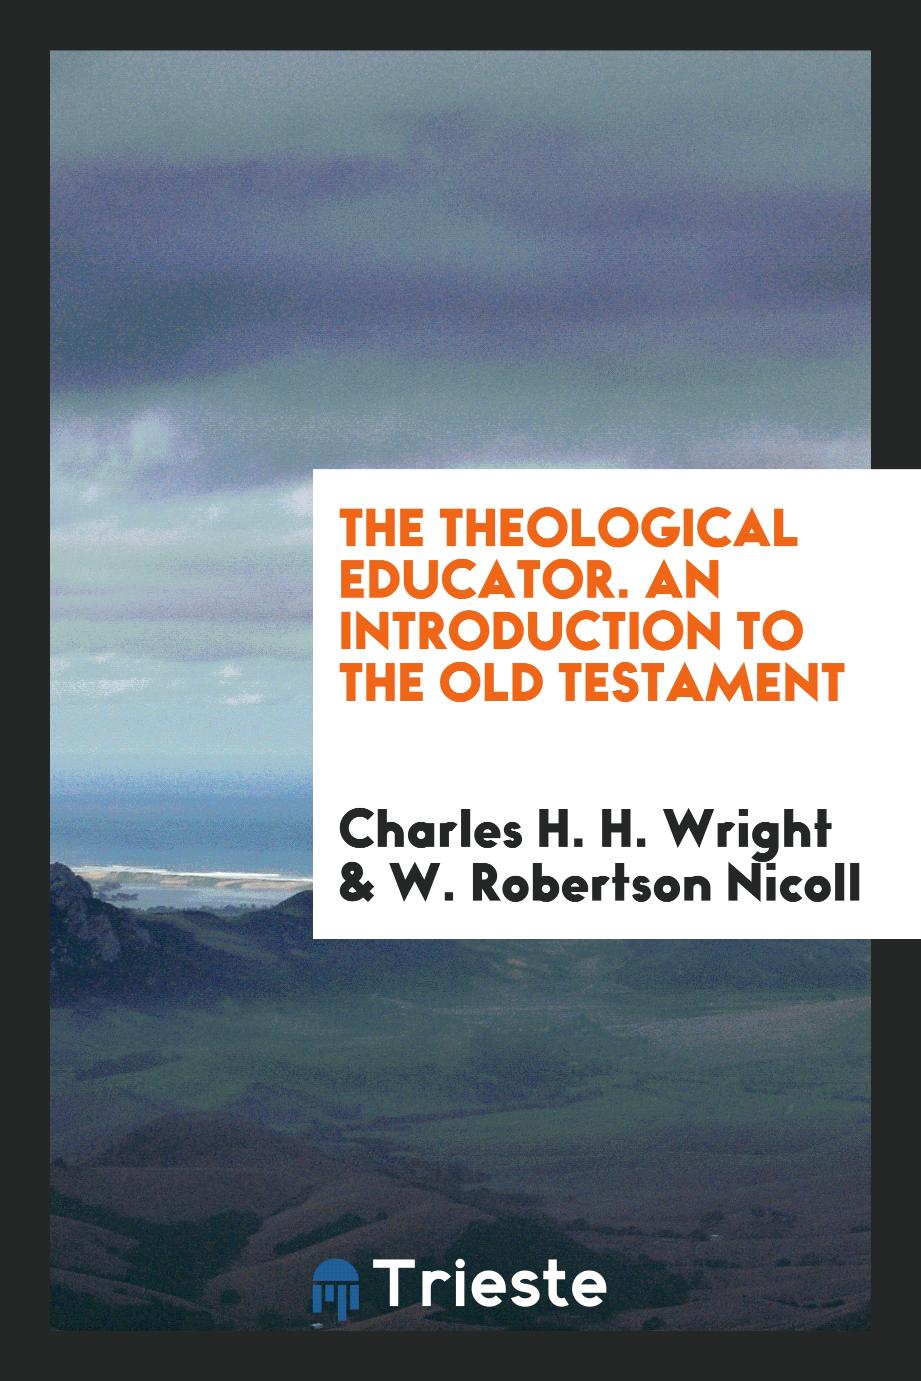 The Theological Educator. An Introduction to the Old Testament